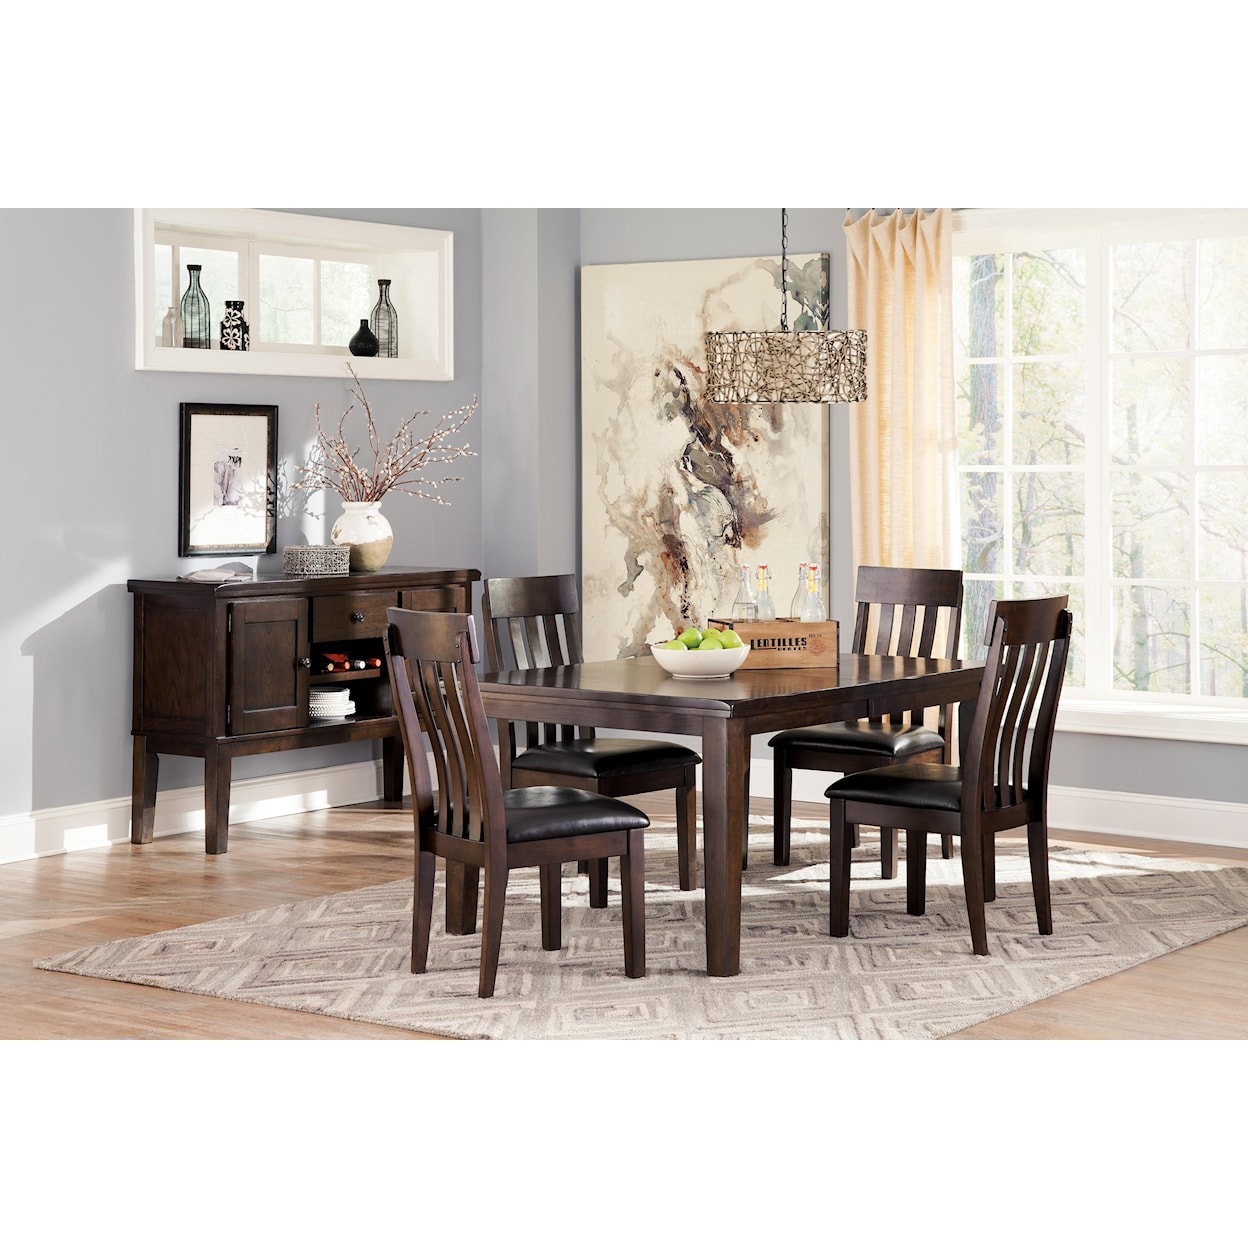 Belfort Select Haddigan 5-Piece Dining Room Table & Side Chair Set